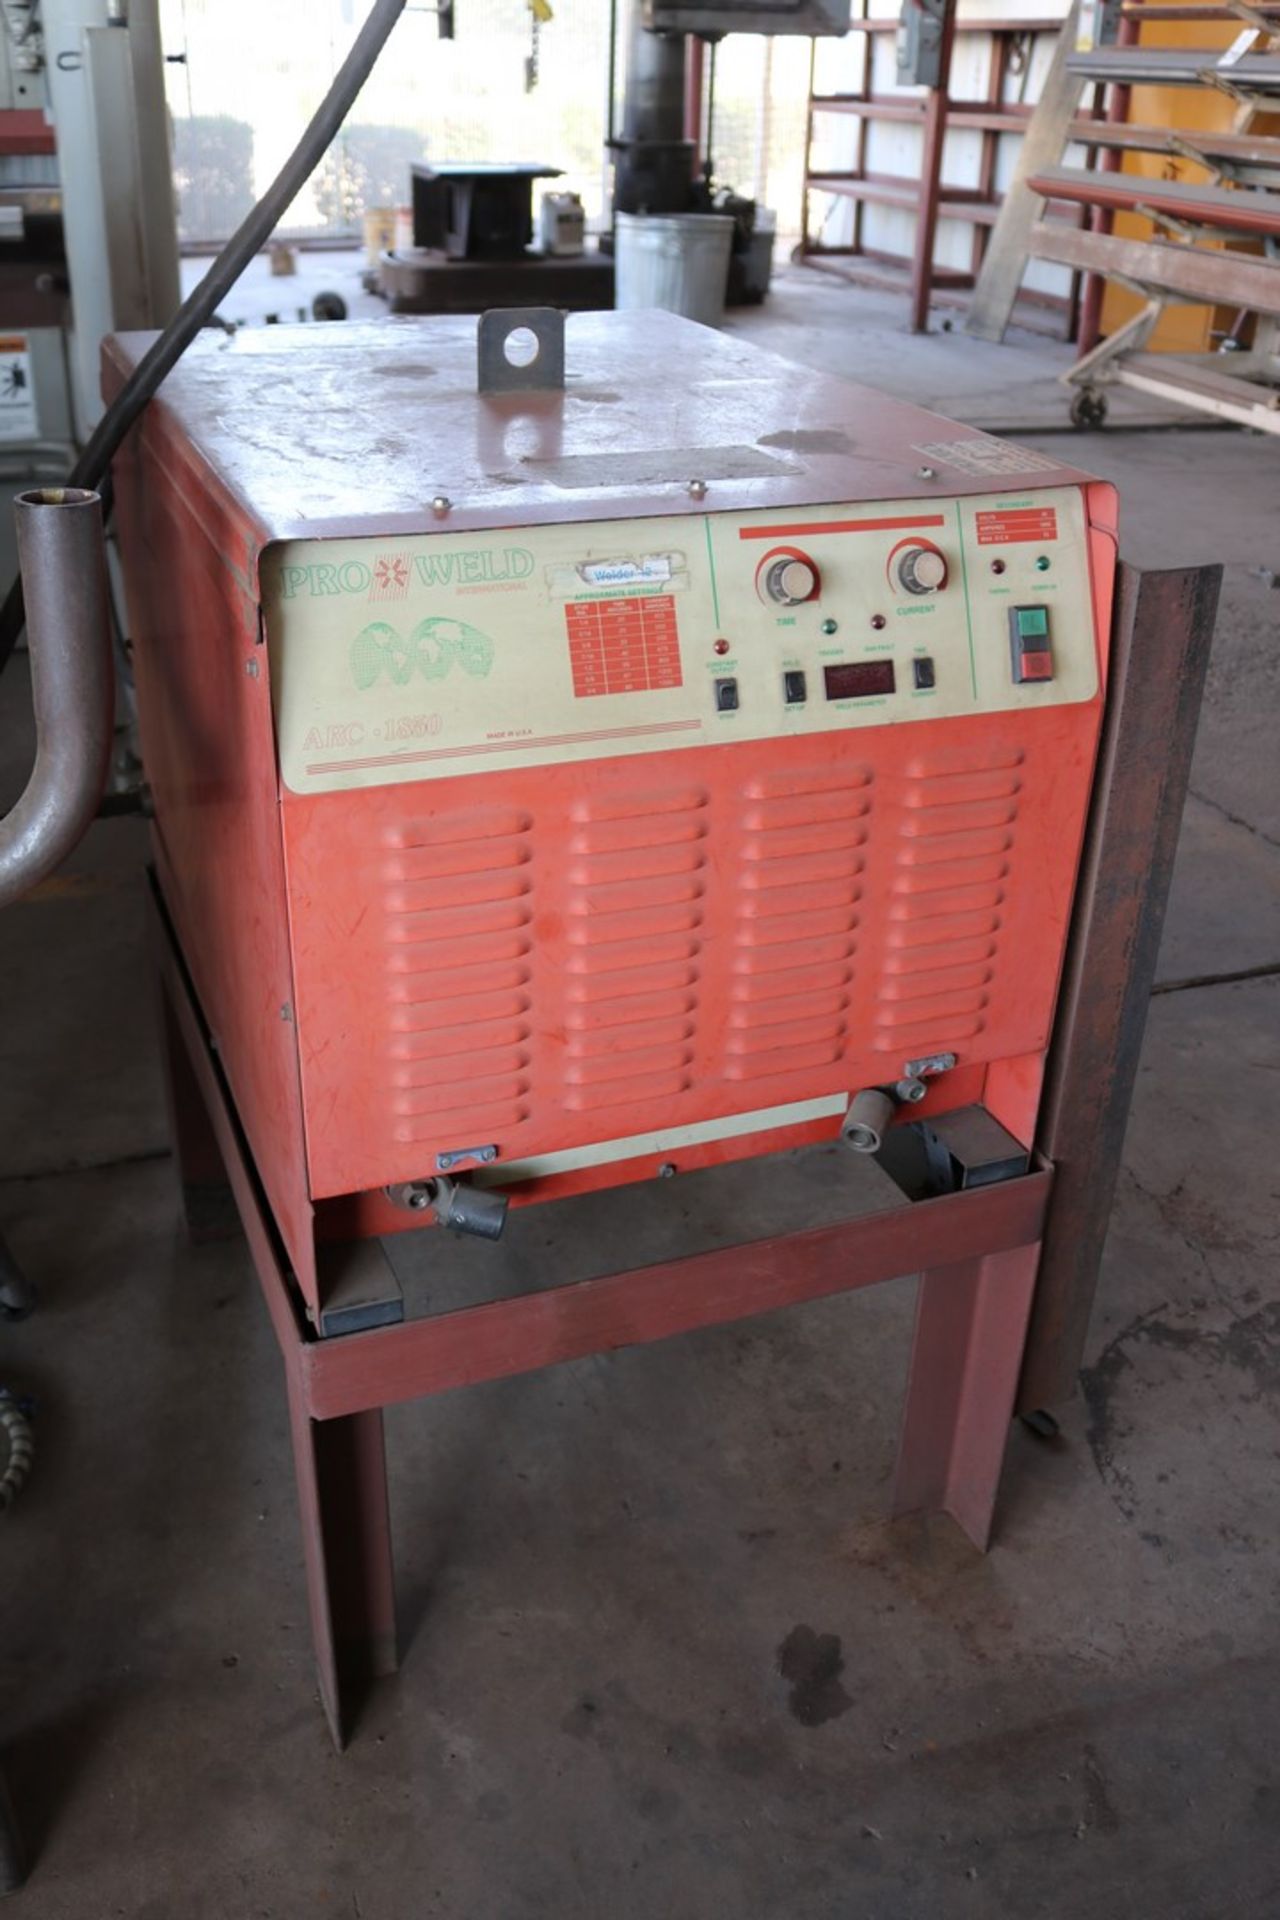 Proweld Arc1850 stud welder, 2 guns w/ leads, including collets and standoffs